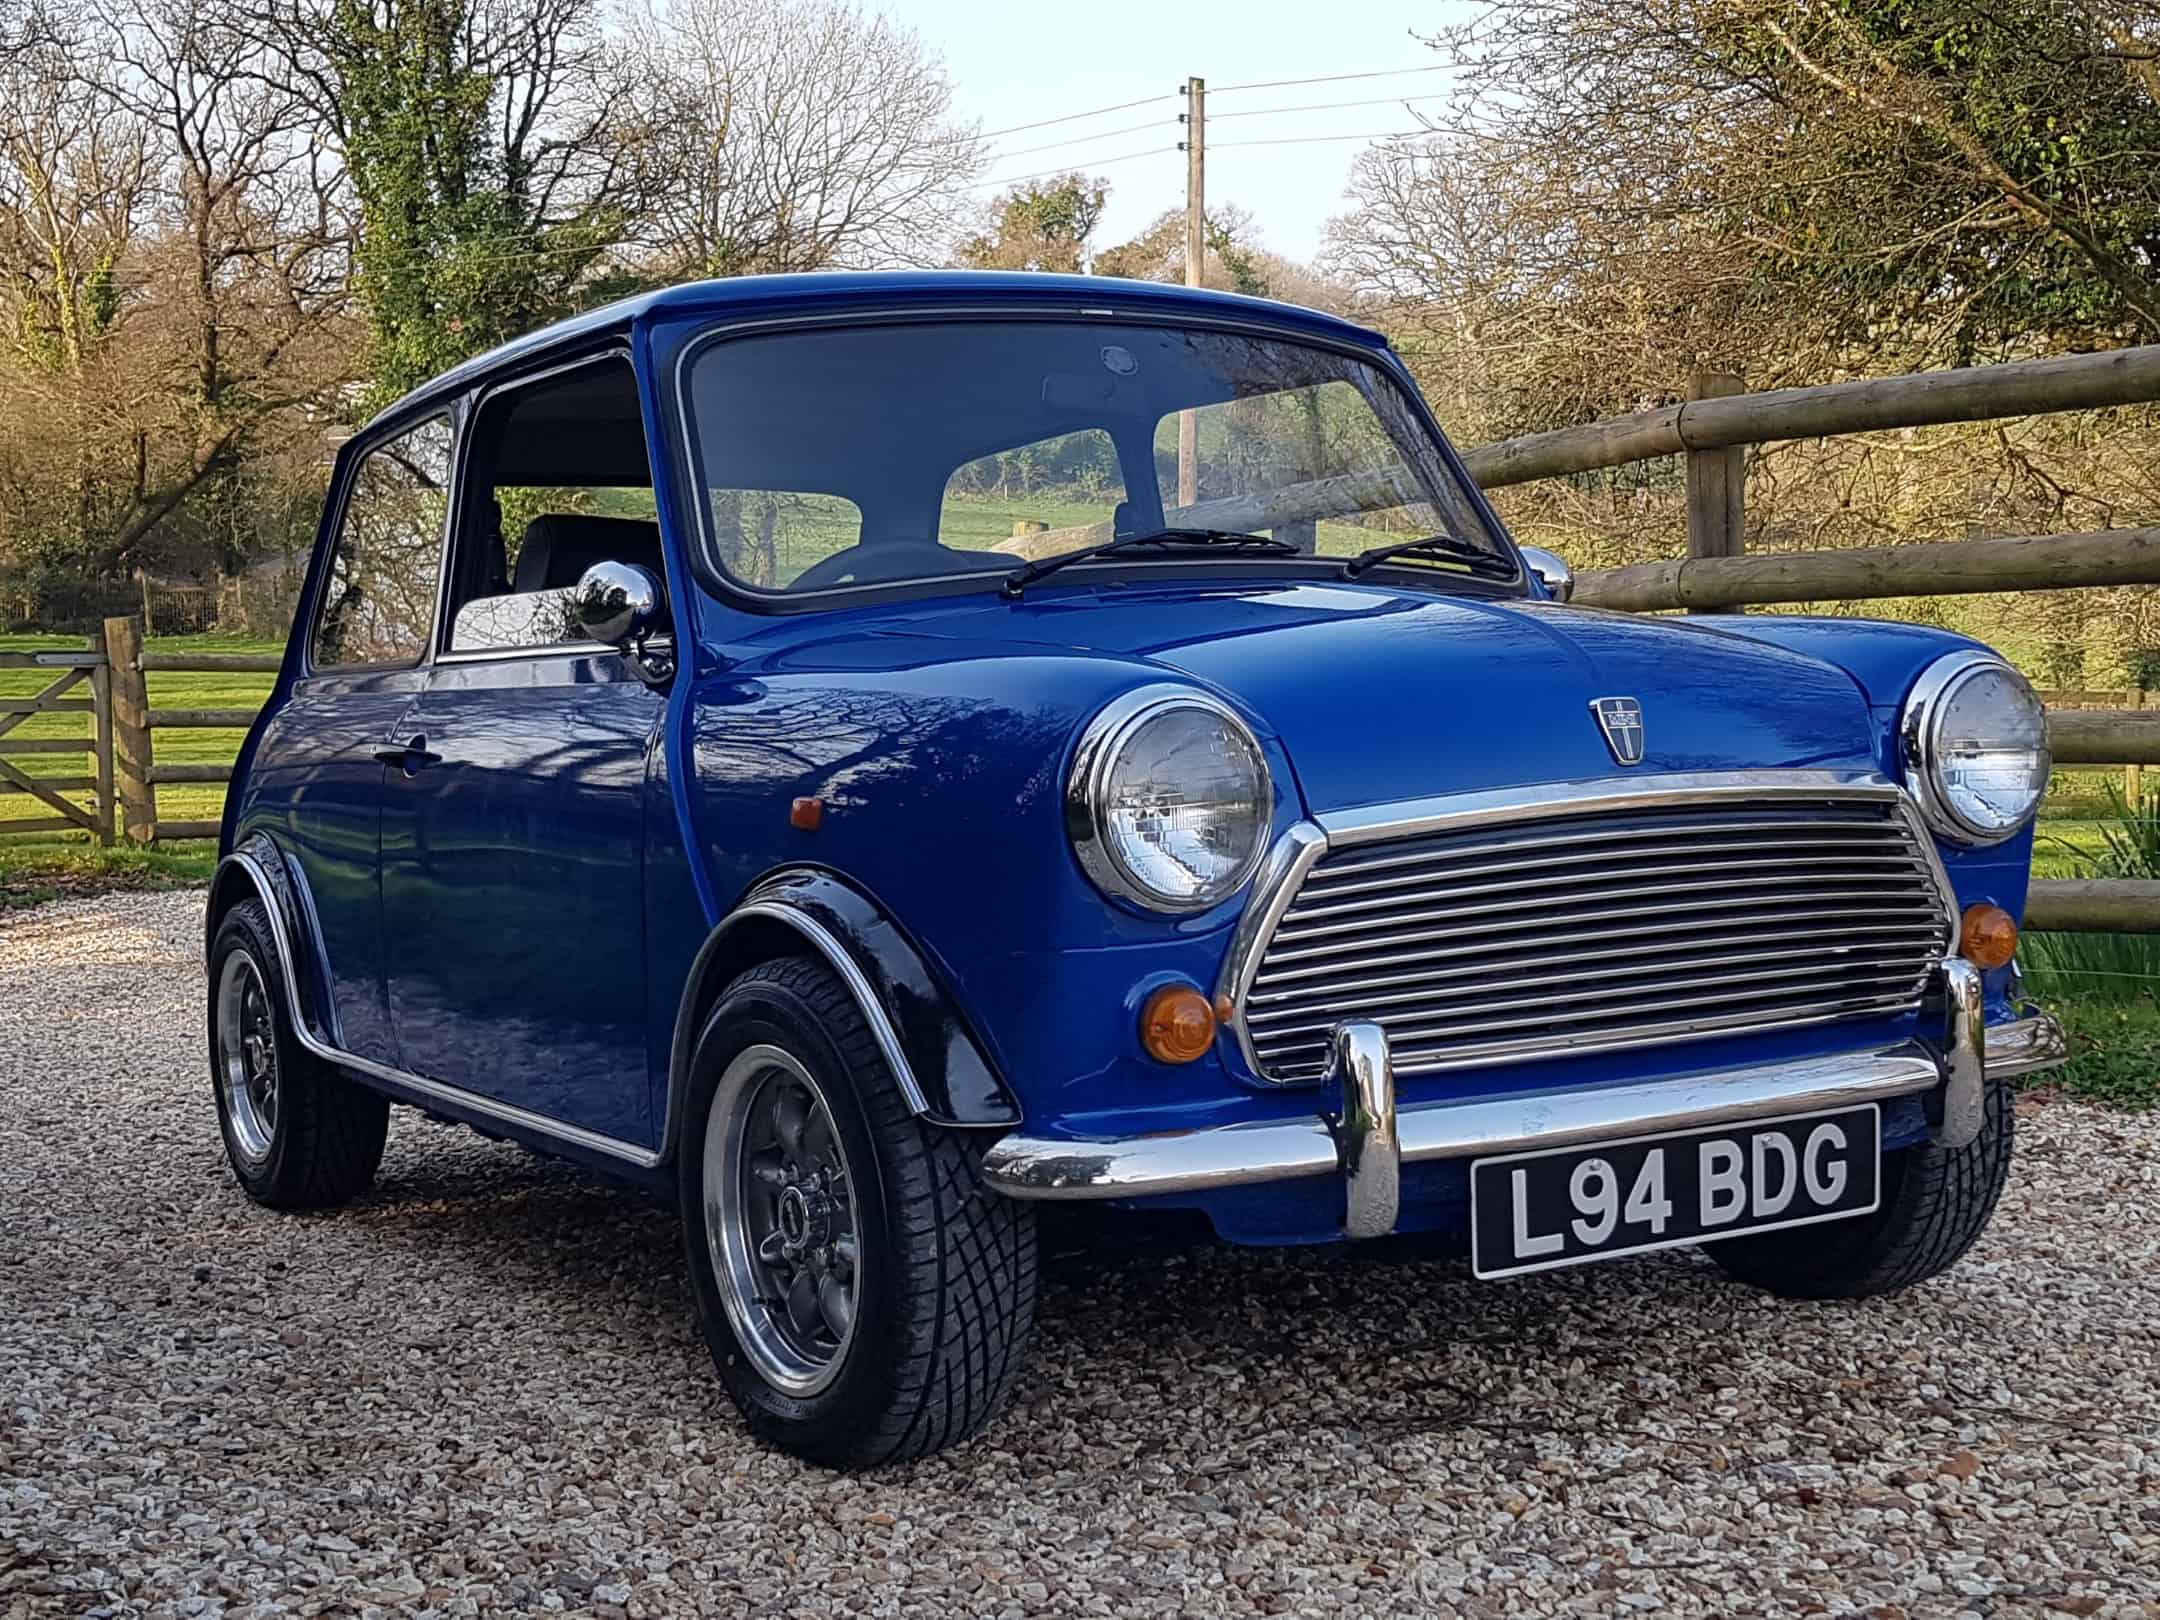 ** NOW SOLD ** 1994 Rover Mini Sprite 1275 CC On Just 27700 Miles In 28 Years!!